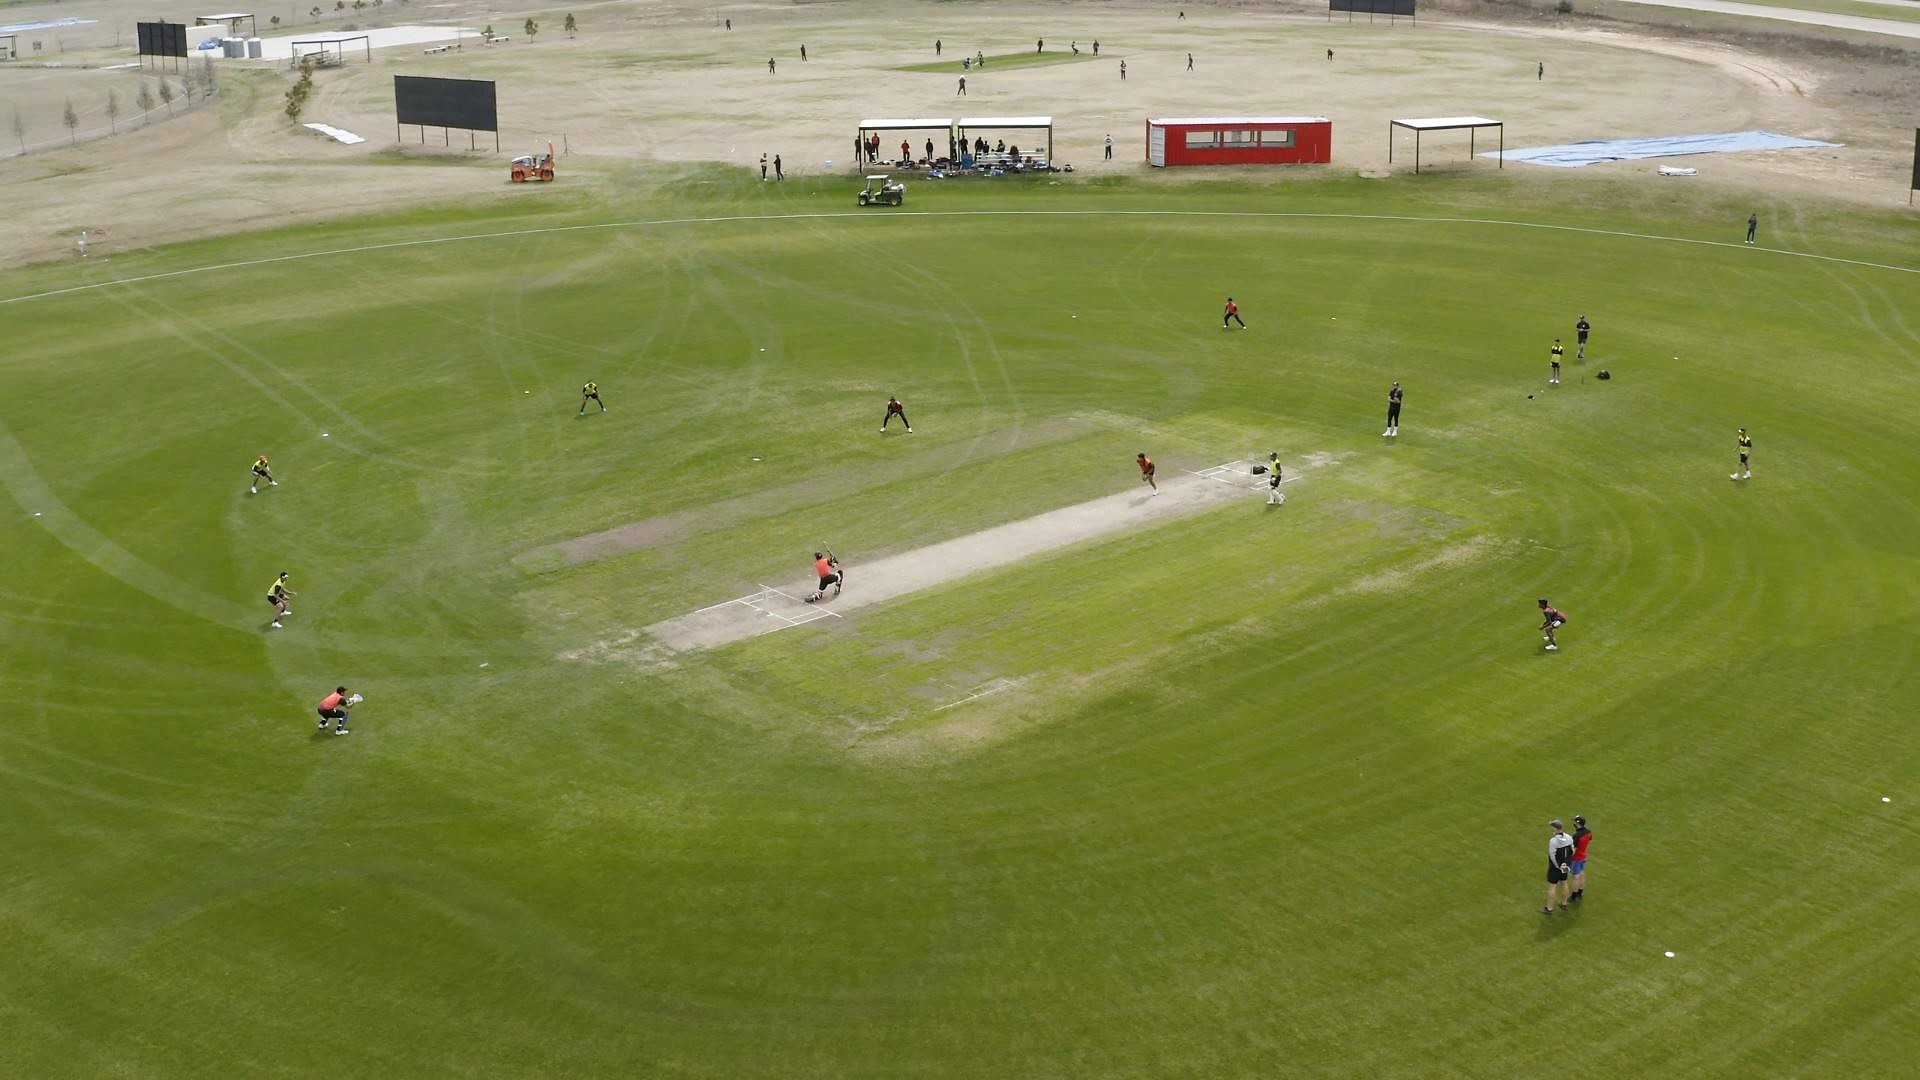 Major League Cricket Invite USA Cricket to Join Triangular Practice Match Series in Texas